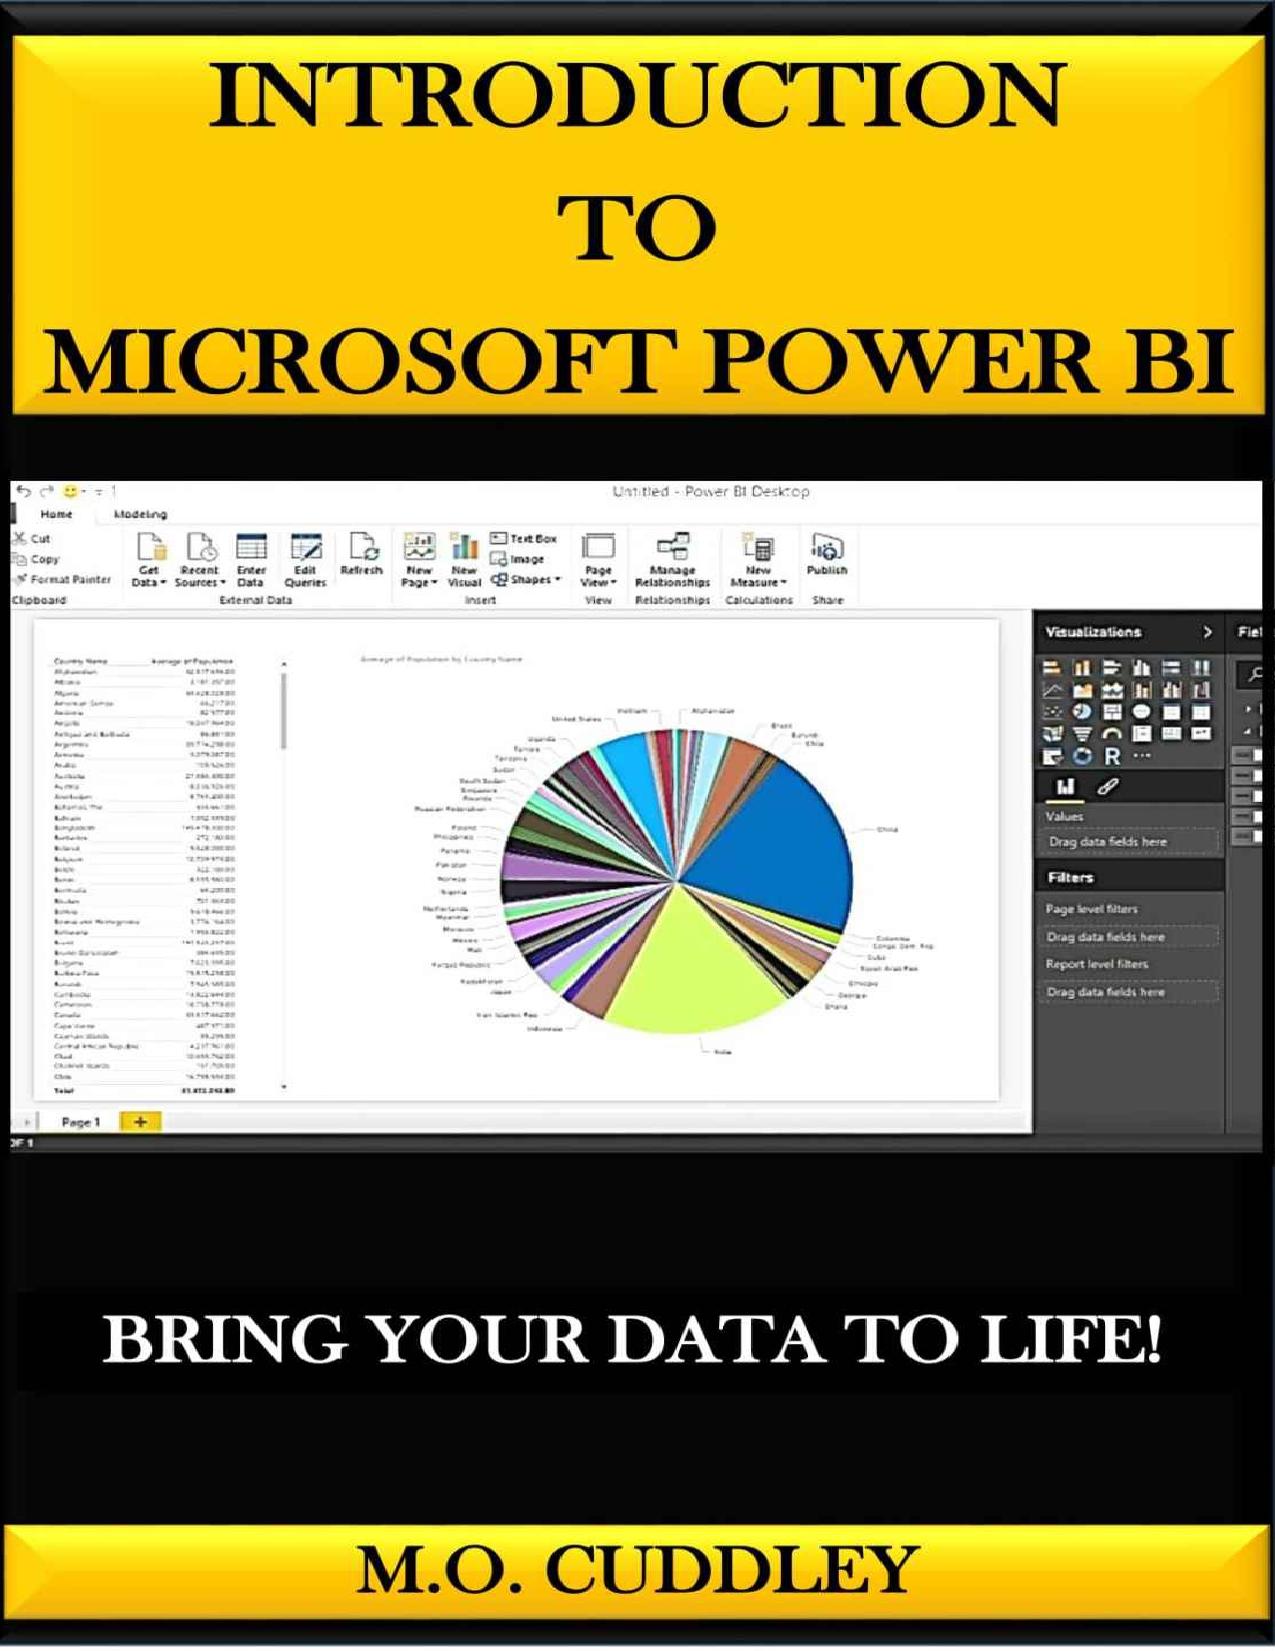 INTRODUCTION TO MICROSOFT POWER BI: BRING YOUR DATA TO LIFE! by M.O. Cuddley